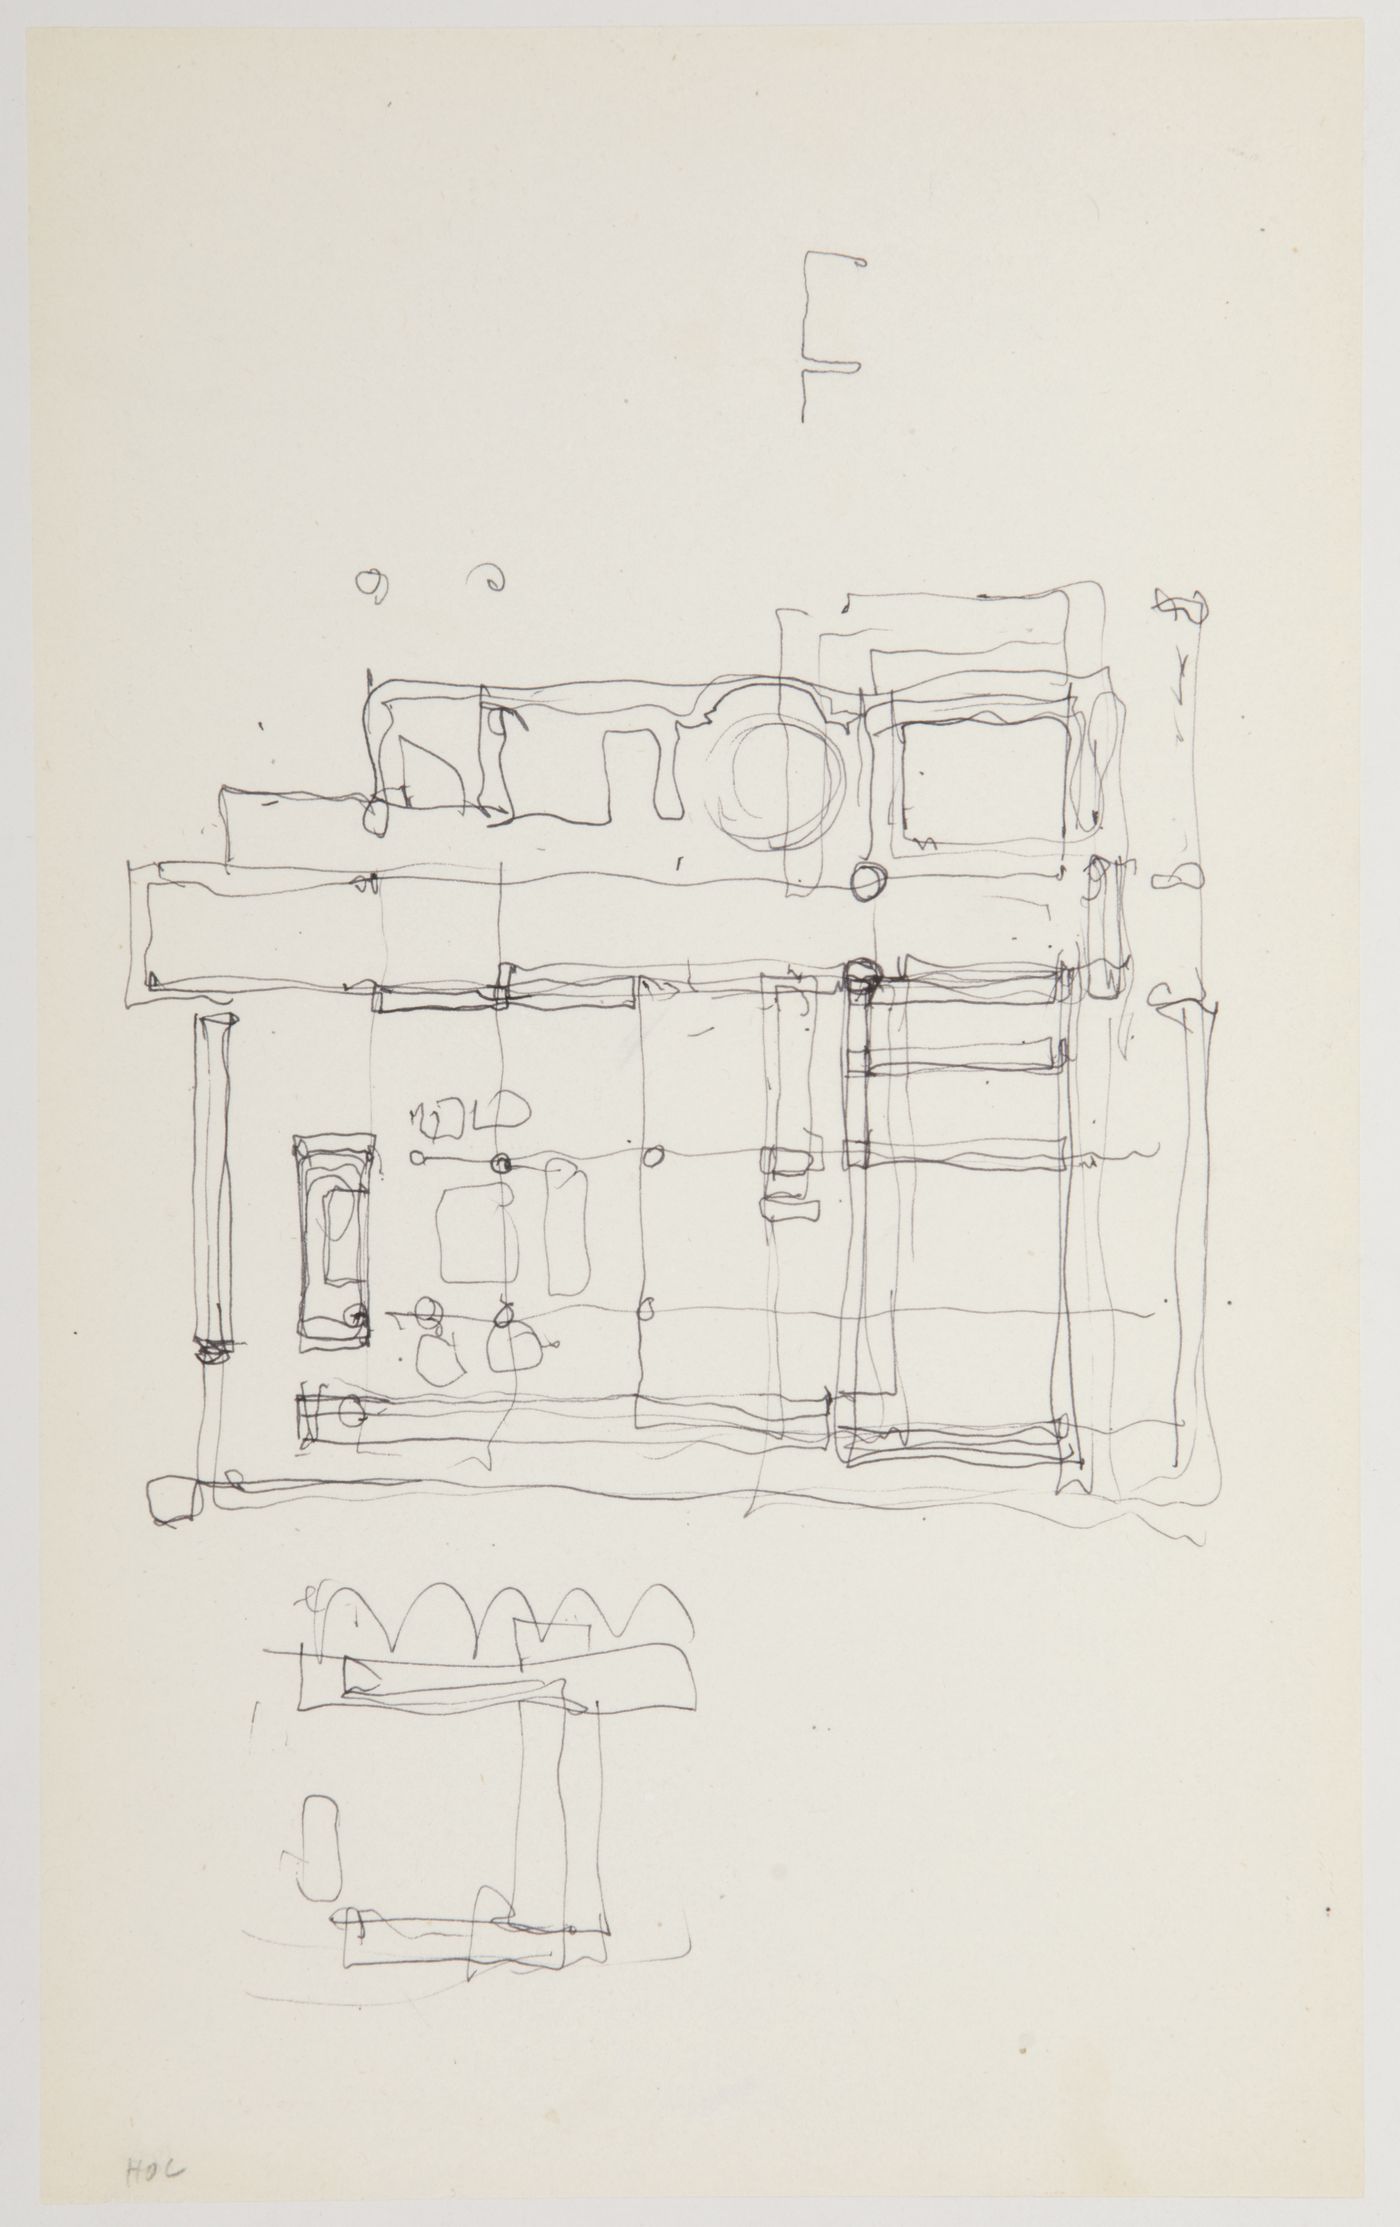 House I, Princeton, New Jersey: Sketched plans